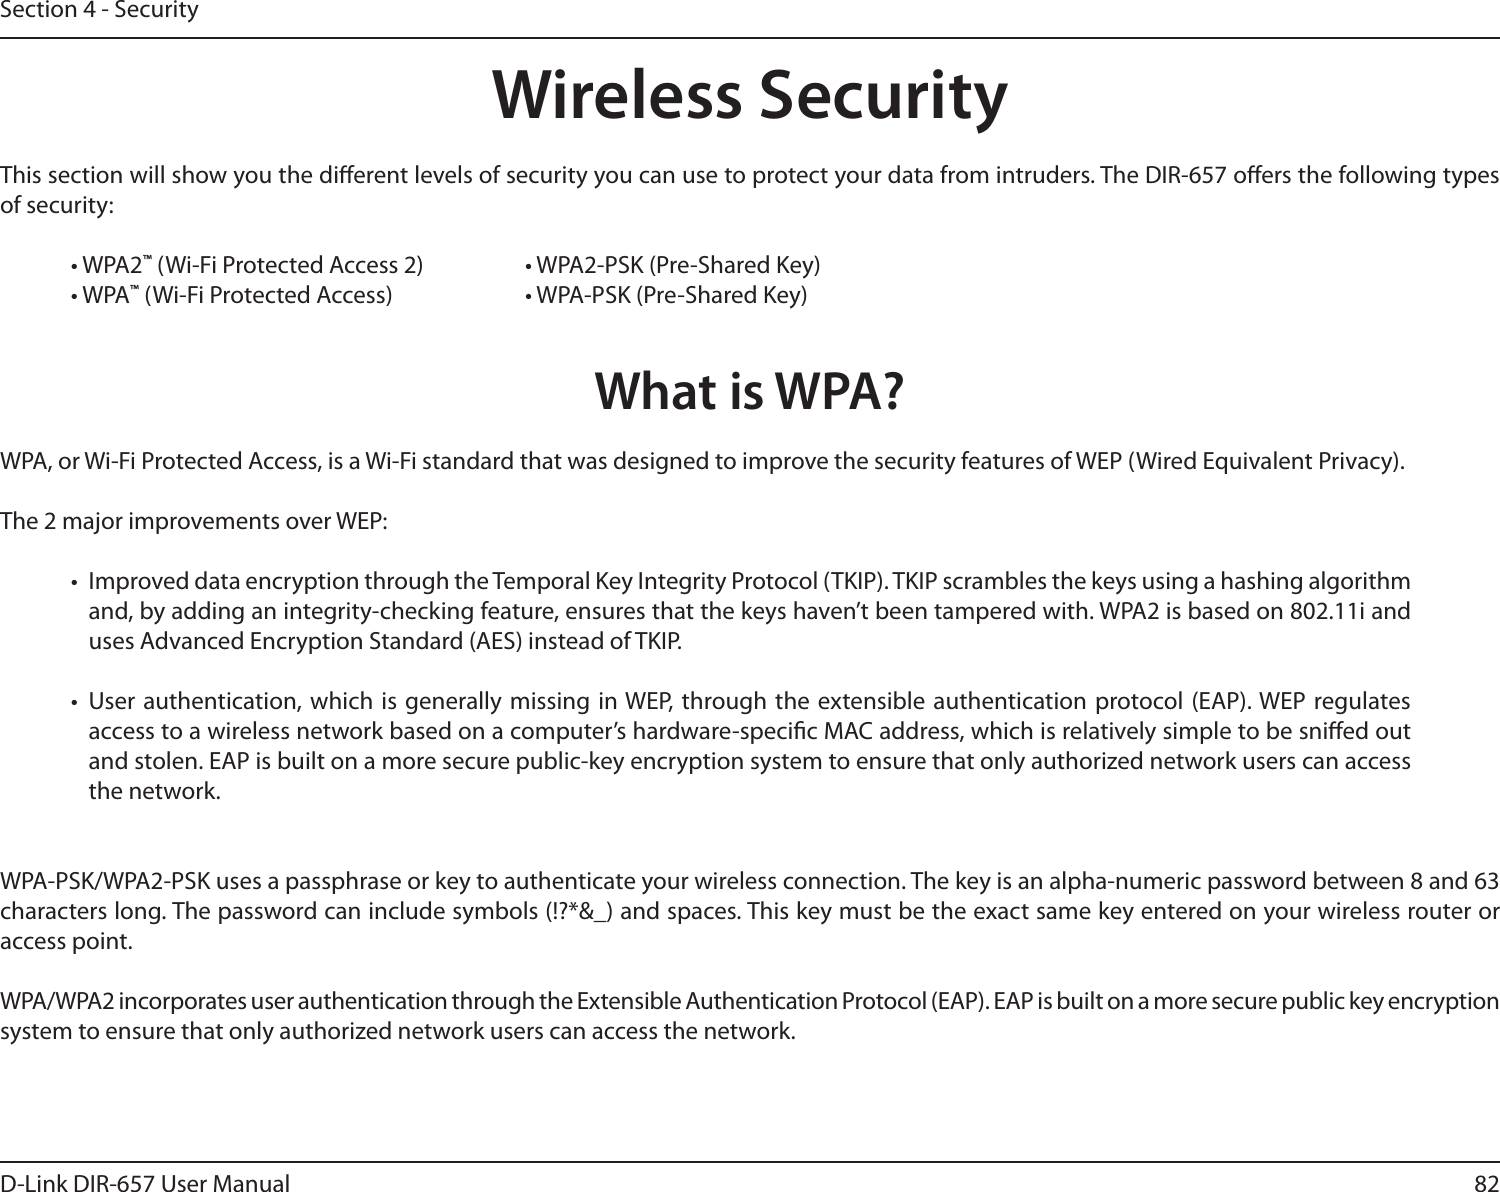 82D-Link DIR-657 User ManualSection 4 - SecurityWireless SecurityThis section will show you the dierent levels of security you can use to protect your data from intruders. The DIR-657 oers the following types of security:• WPA2™ (Wi-Fi Protected Access 2)     • WPA2-PSK (Pre-Shared Key)• WPA™ (Wi-Fi Protected Access)    • WPA-PSK (Pre-Shared Key)What is WPA?WPA, or Wi-Fi Protected Access, is a Wi-Fi standard that was designed to improve the security features of WEP (Wired Equivalent Privacy).  The 2 major improvements over WEP: •  Improved data encryption through the Temporal Key Integrity Protocol (TKIP). TKIP scrambles the keys using a hashing algorithm and, by adding an integrity-checking feature, ensures that the keys haven’t been tampered with. WPA2 is based on 802.11i and uses Advanced Encryption Standard (AES) instead of TKIP.•  User authentication, which is  generally missing in WEP, through the extensible authentication protocol (EAP). WEP regulates access to a wireless network based on a computer’s hardware-specic MAC address, which is relatively simple to be snied out and stolen. EAP is built on a more secure public-key encryption system to ensure that only authorized network users can access the network.WPA-PSK/WPA2-PSK uses a passphrase or key to authenticate your wireless connection. The key is an alpha-numeric password between 8 and 63 characters long. The password can include symbols (!?*&amp;_) and spaces. This key must be the exact same key entered on your wireless router or access point.WPA/WPA2 incorporates user authentication through the Extensible Authentication Protocol (EAP). EAP is built on a more secure public key encryption system to ensure that only authorized network users can access the network.